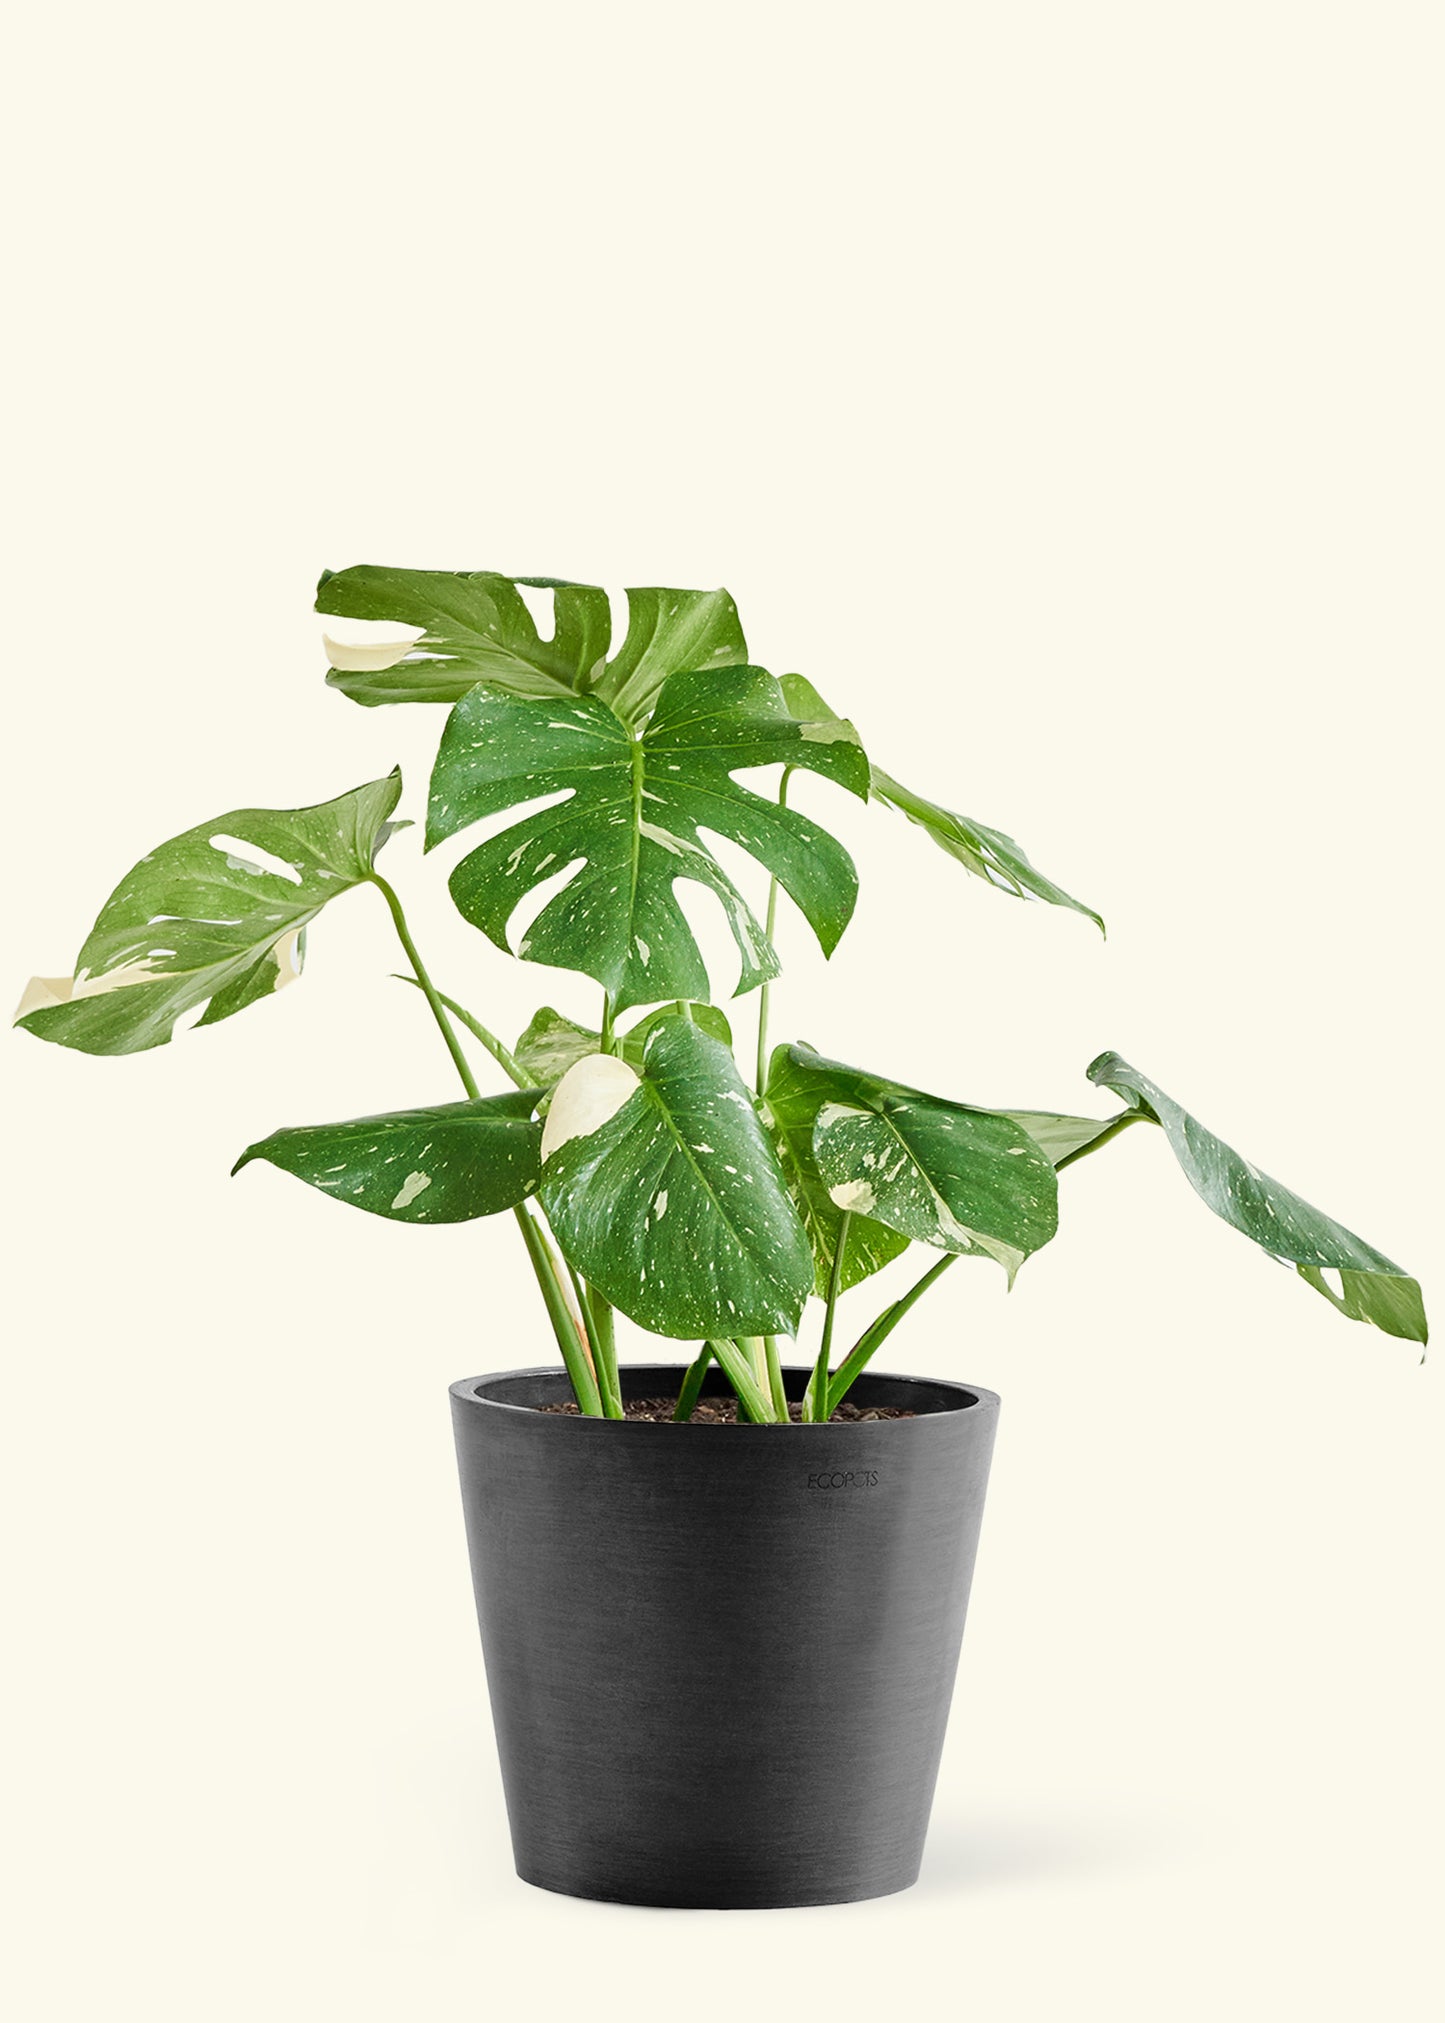 Large Monstera ‘Thai Constellation’ Plant in a black pot.